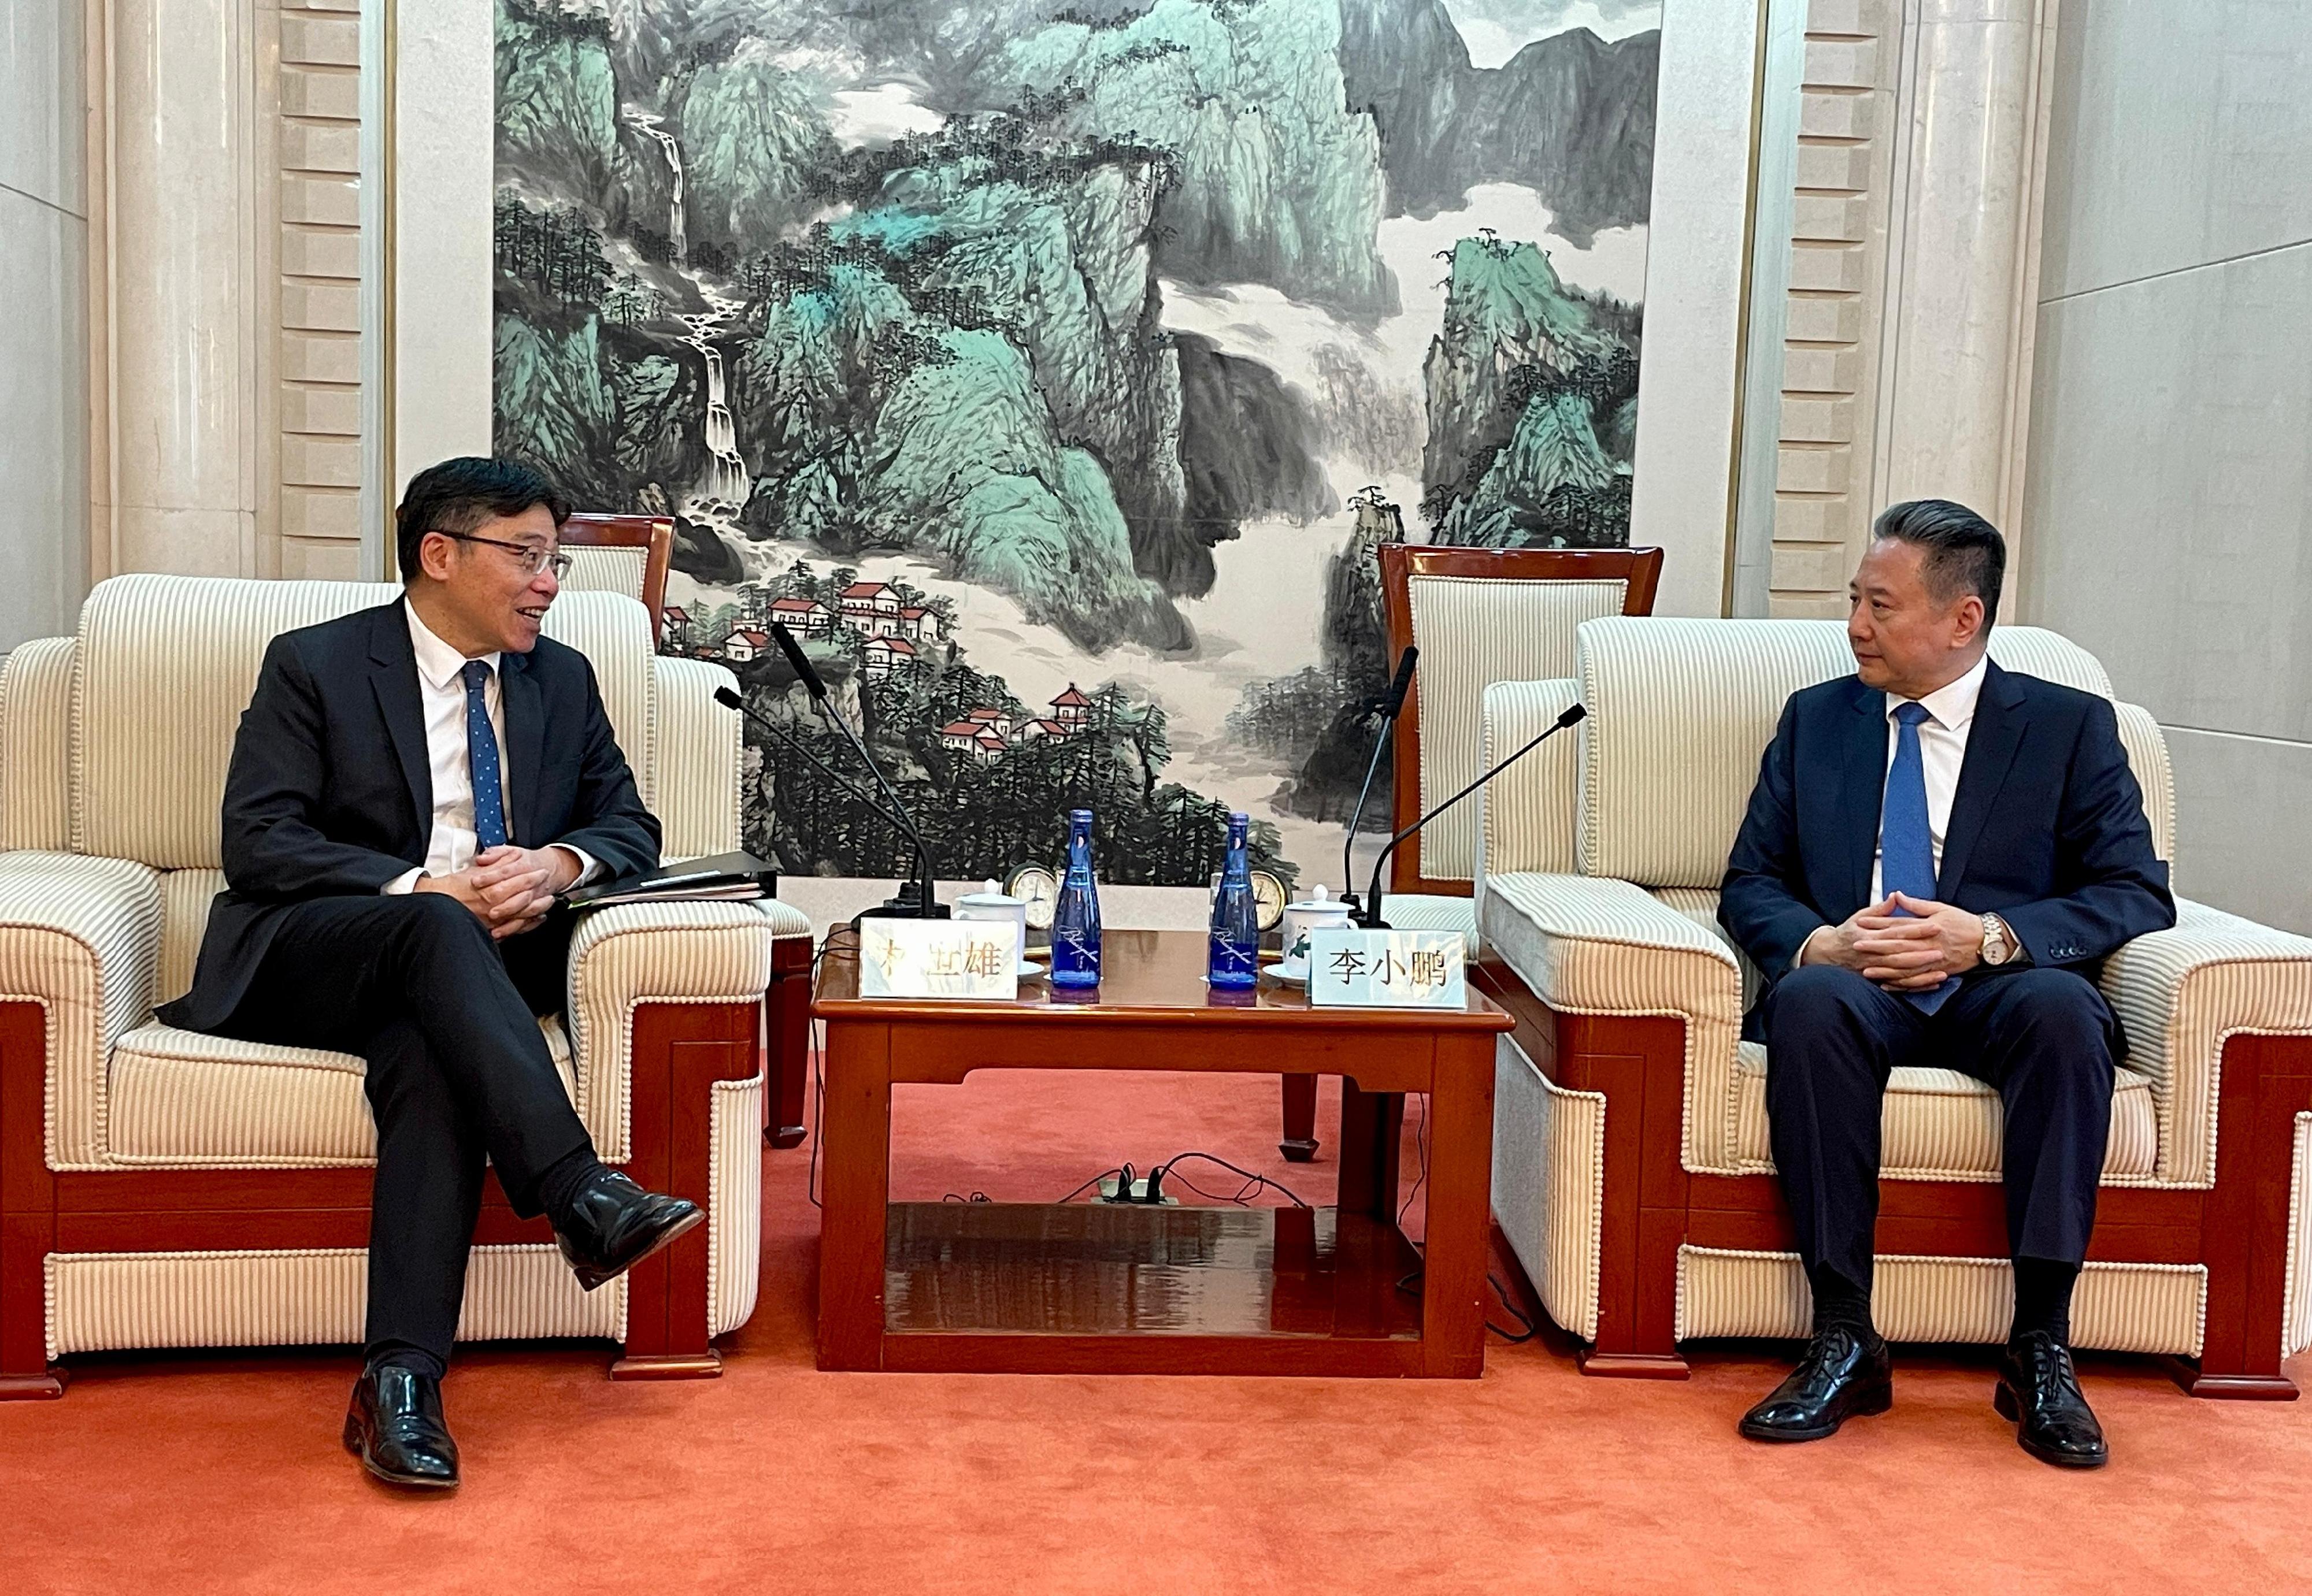 The Secretary for Transport and Logistics, Mr Lam Sai-hung, arrived in Beijing yesterday (April 9). Photo shows Mr Lam (left) having a meeting with the Minister of Transport, Mr Li Xiaopeng (right), introducing to him Hong Kong's transport and logistics developments in air, land and sea.